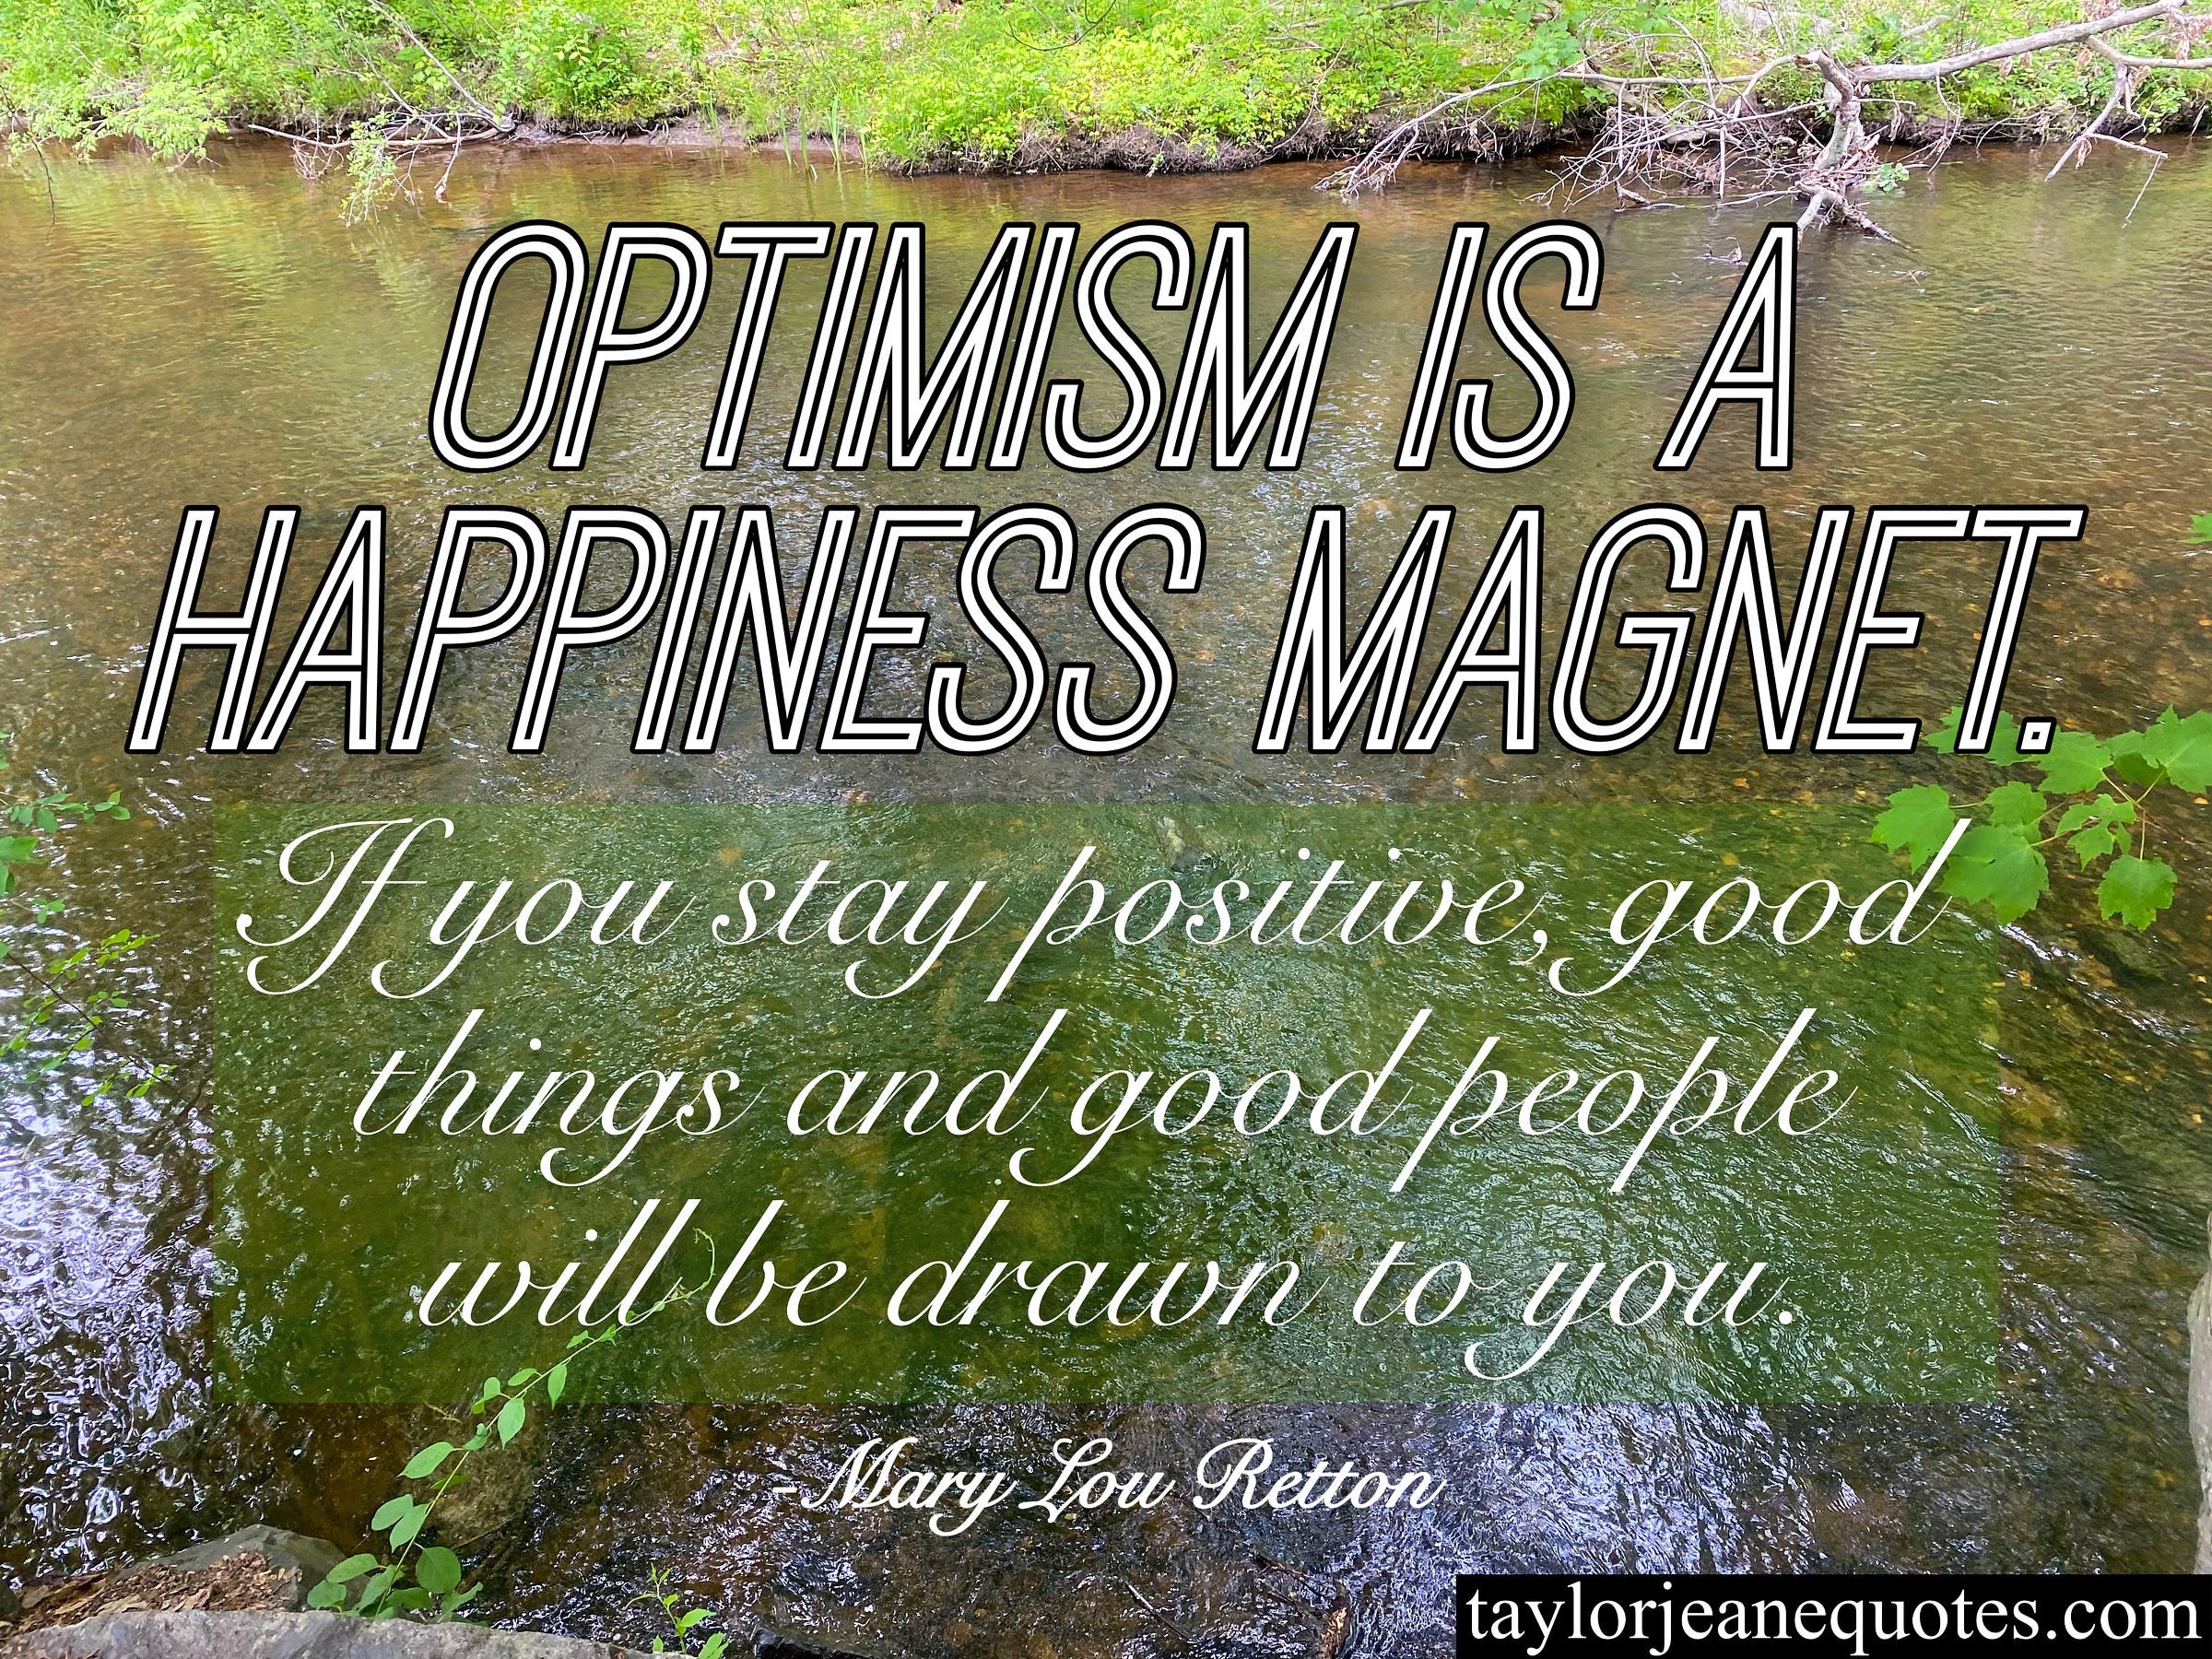 taylor jeane quotes, taylor jeane, taylor wilson, taylor wilson quotes, inspirational quotes, motivational quotes, daily quotes, mary lou retton, mary lou retton quotes, gymnastics quotes, olympics quotes, olympian quotes, olympic gymnast quotes, optimism quotes, be optimistic quotes, happiness quotes, be happy quotes, positive quotes, mindset quotes, optimism is a happiness magnet quotes, metaphor quotes, quotes with metaphors, mindset quotes, think positive quotes, think positively quotes, river, be a good person quotes, be a good human quotes, inspiring daily quotes